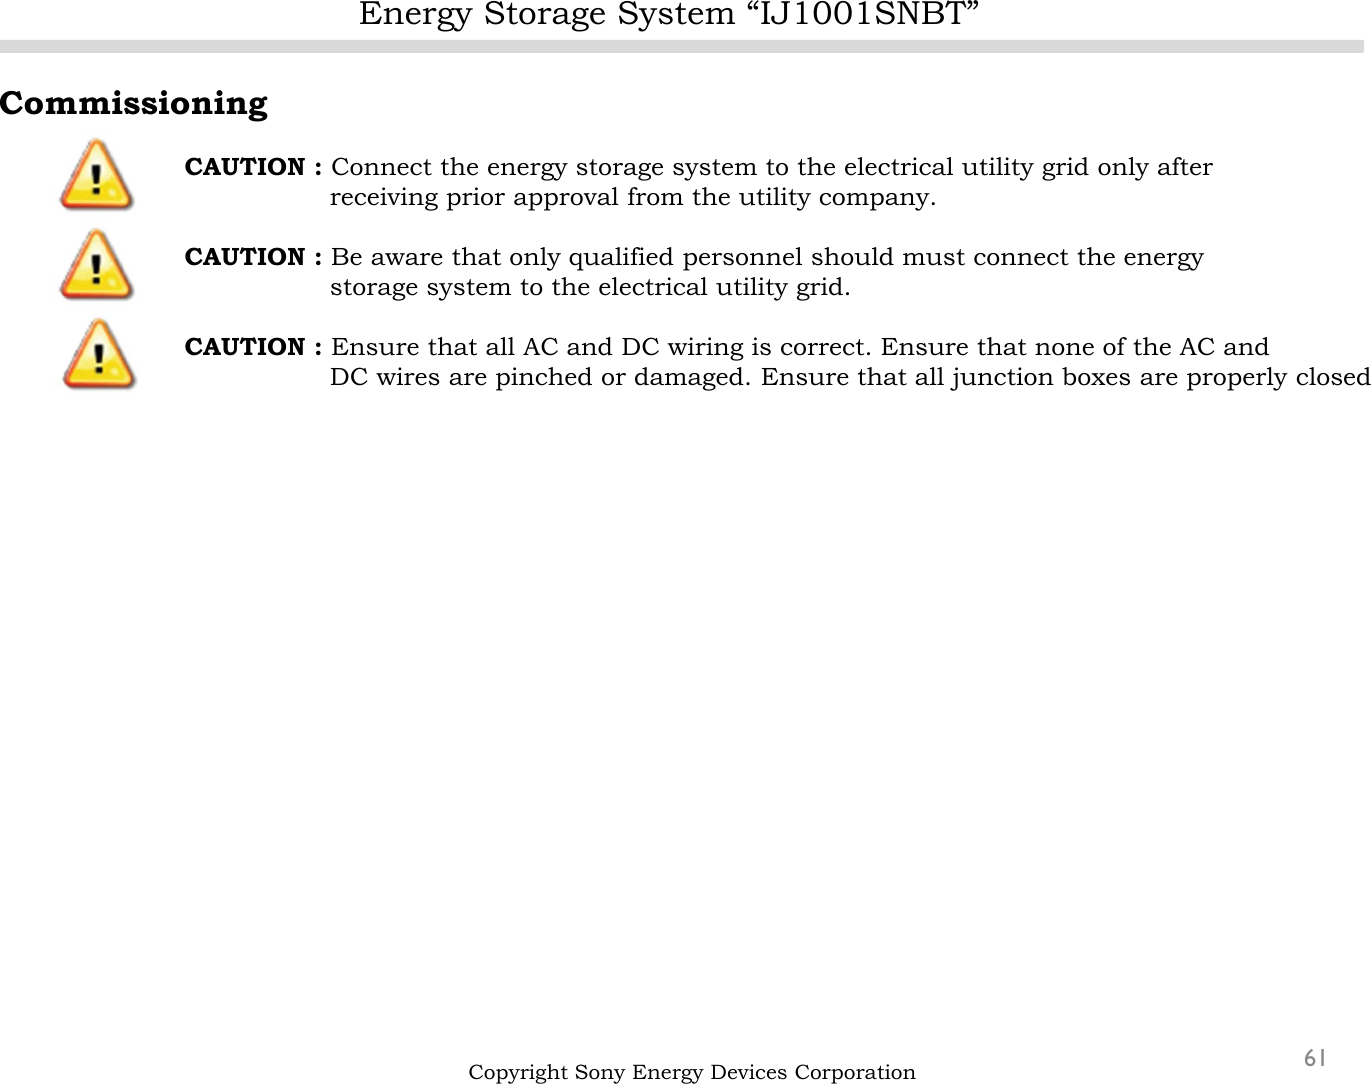 Energy Storage System “IJ1001SNBT”61Copyright Sony Energy Devices CorporationCommissioningCAUTION : Connect the energy storage system to the electrical utility grid only after  receiving prior approval from the utility company.CAUTION : Be aware that only qualified personnel should must connect the energy storage system to the electrical utility grid.CAUTION : Ensure that all AC and DC wiring is correct. Ensure that none of the AC and DC wires are pinched or damaged. Ensure that all junction boxes are properly closed